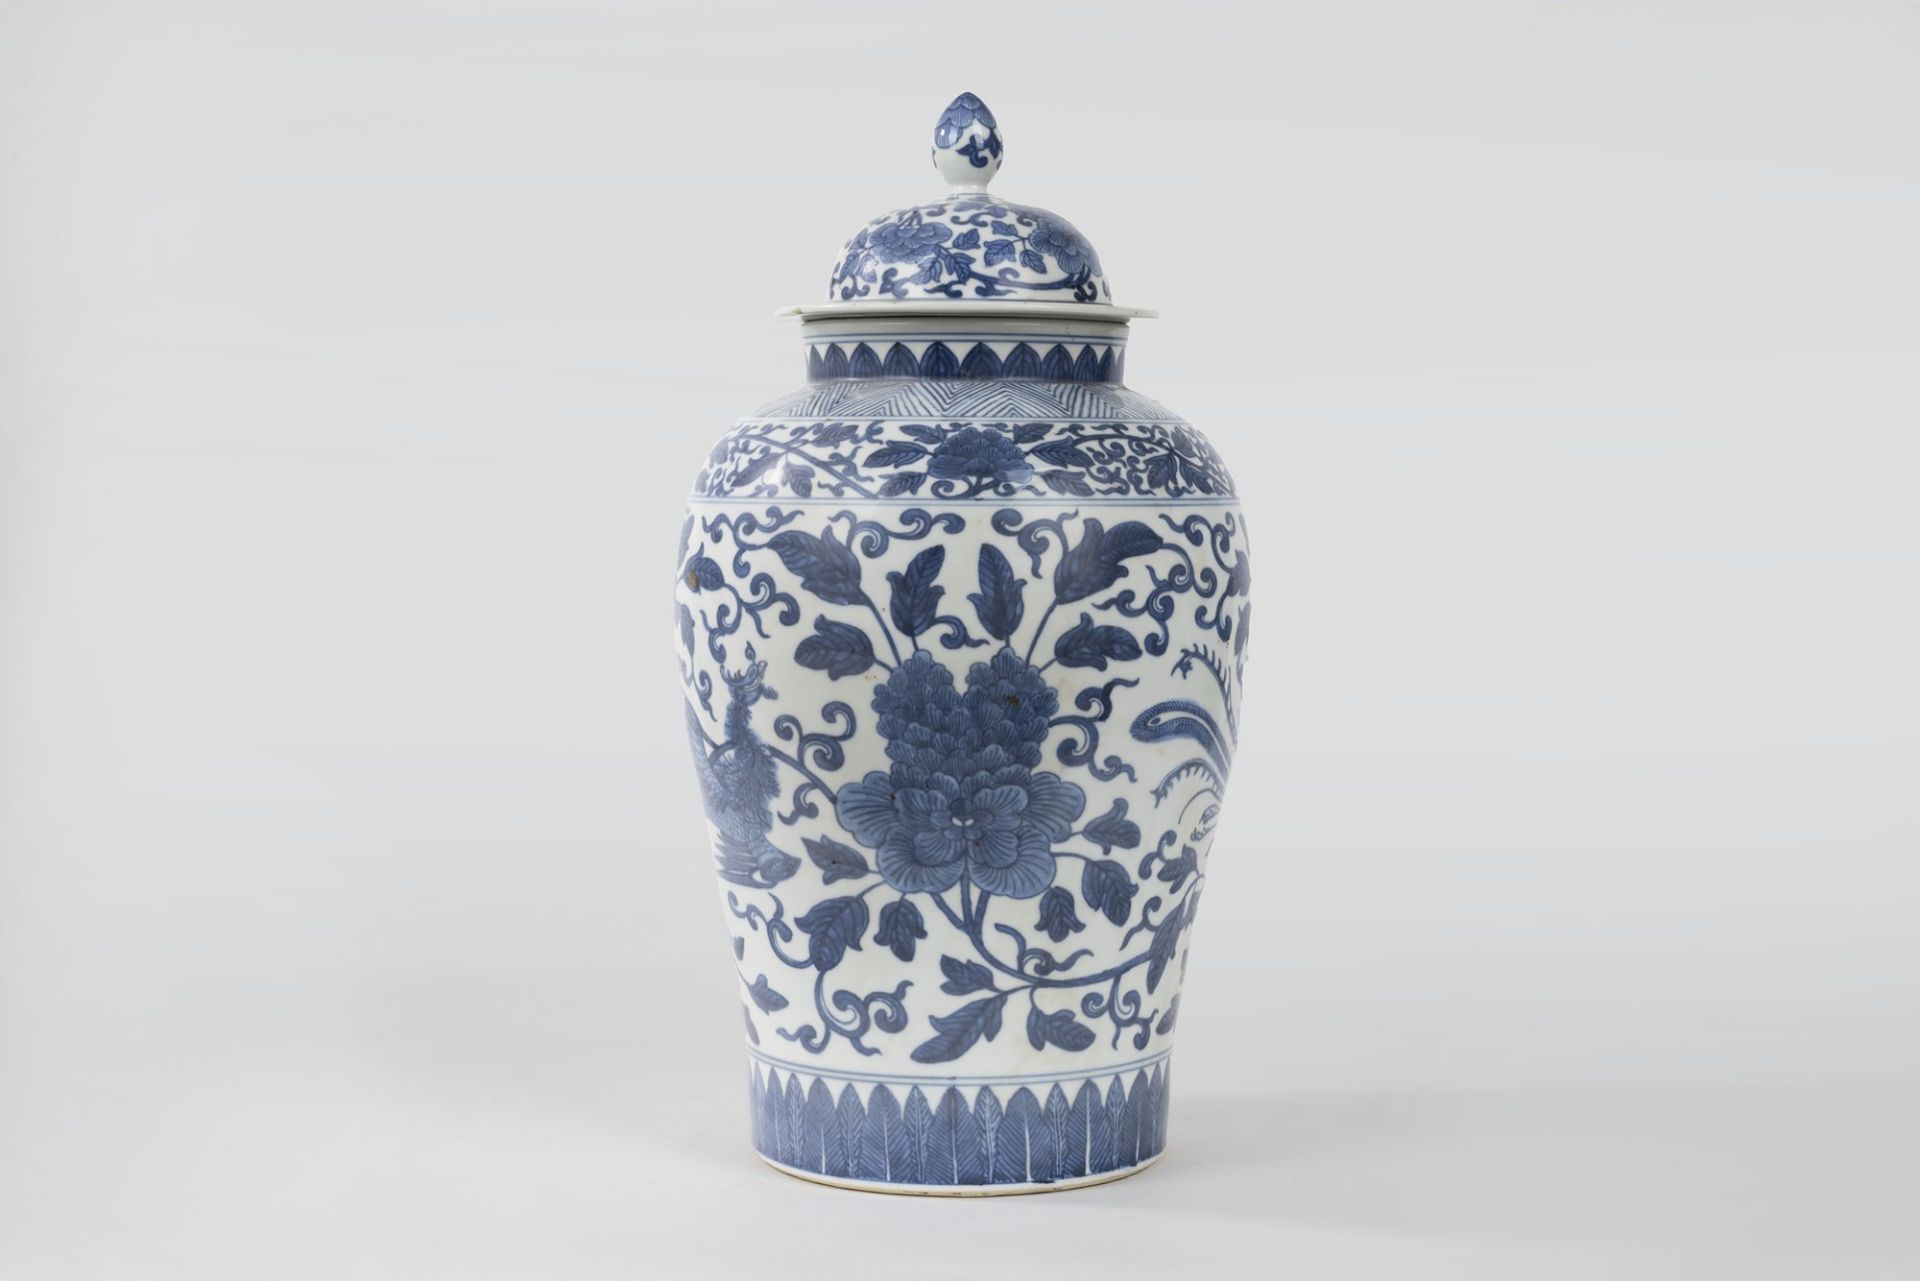 Blue and white porcelain vase with lid, China, 20th century